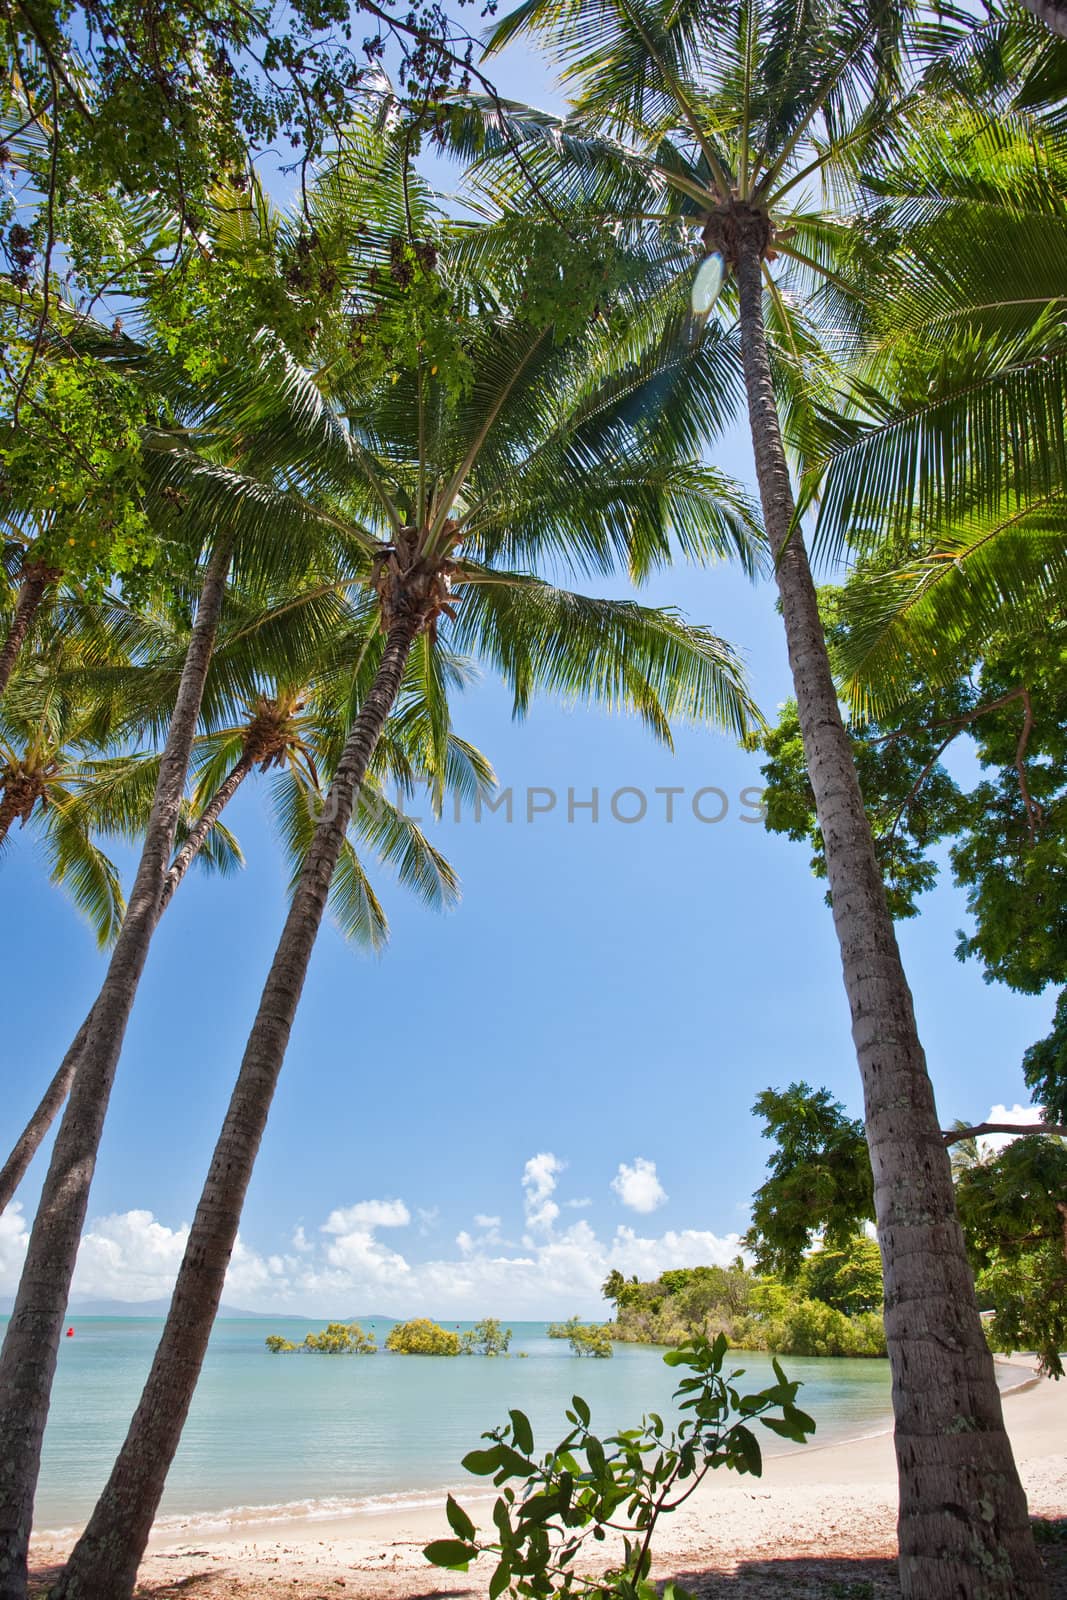 View between coconut palms of a sunny tropical beach with golden sand and a calm blue ocean